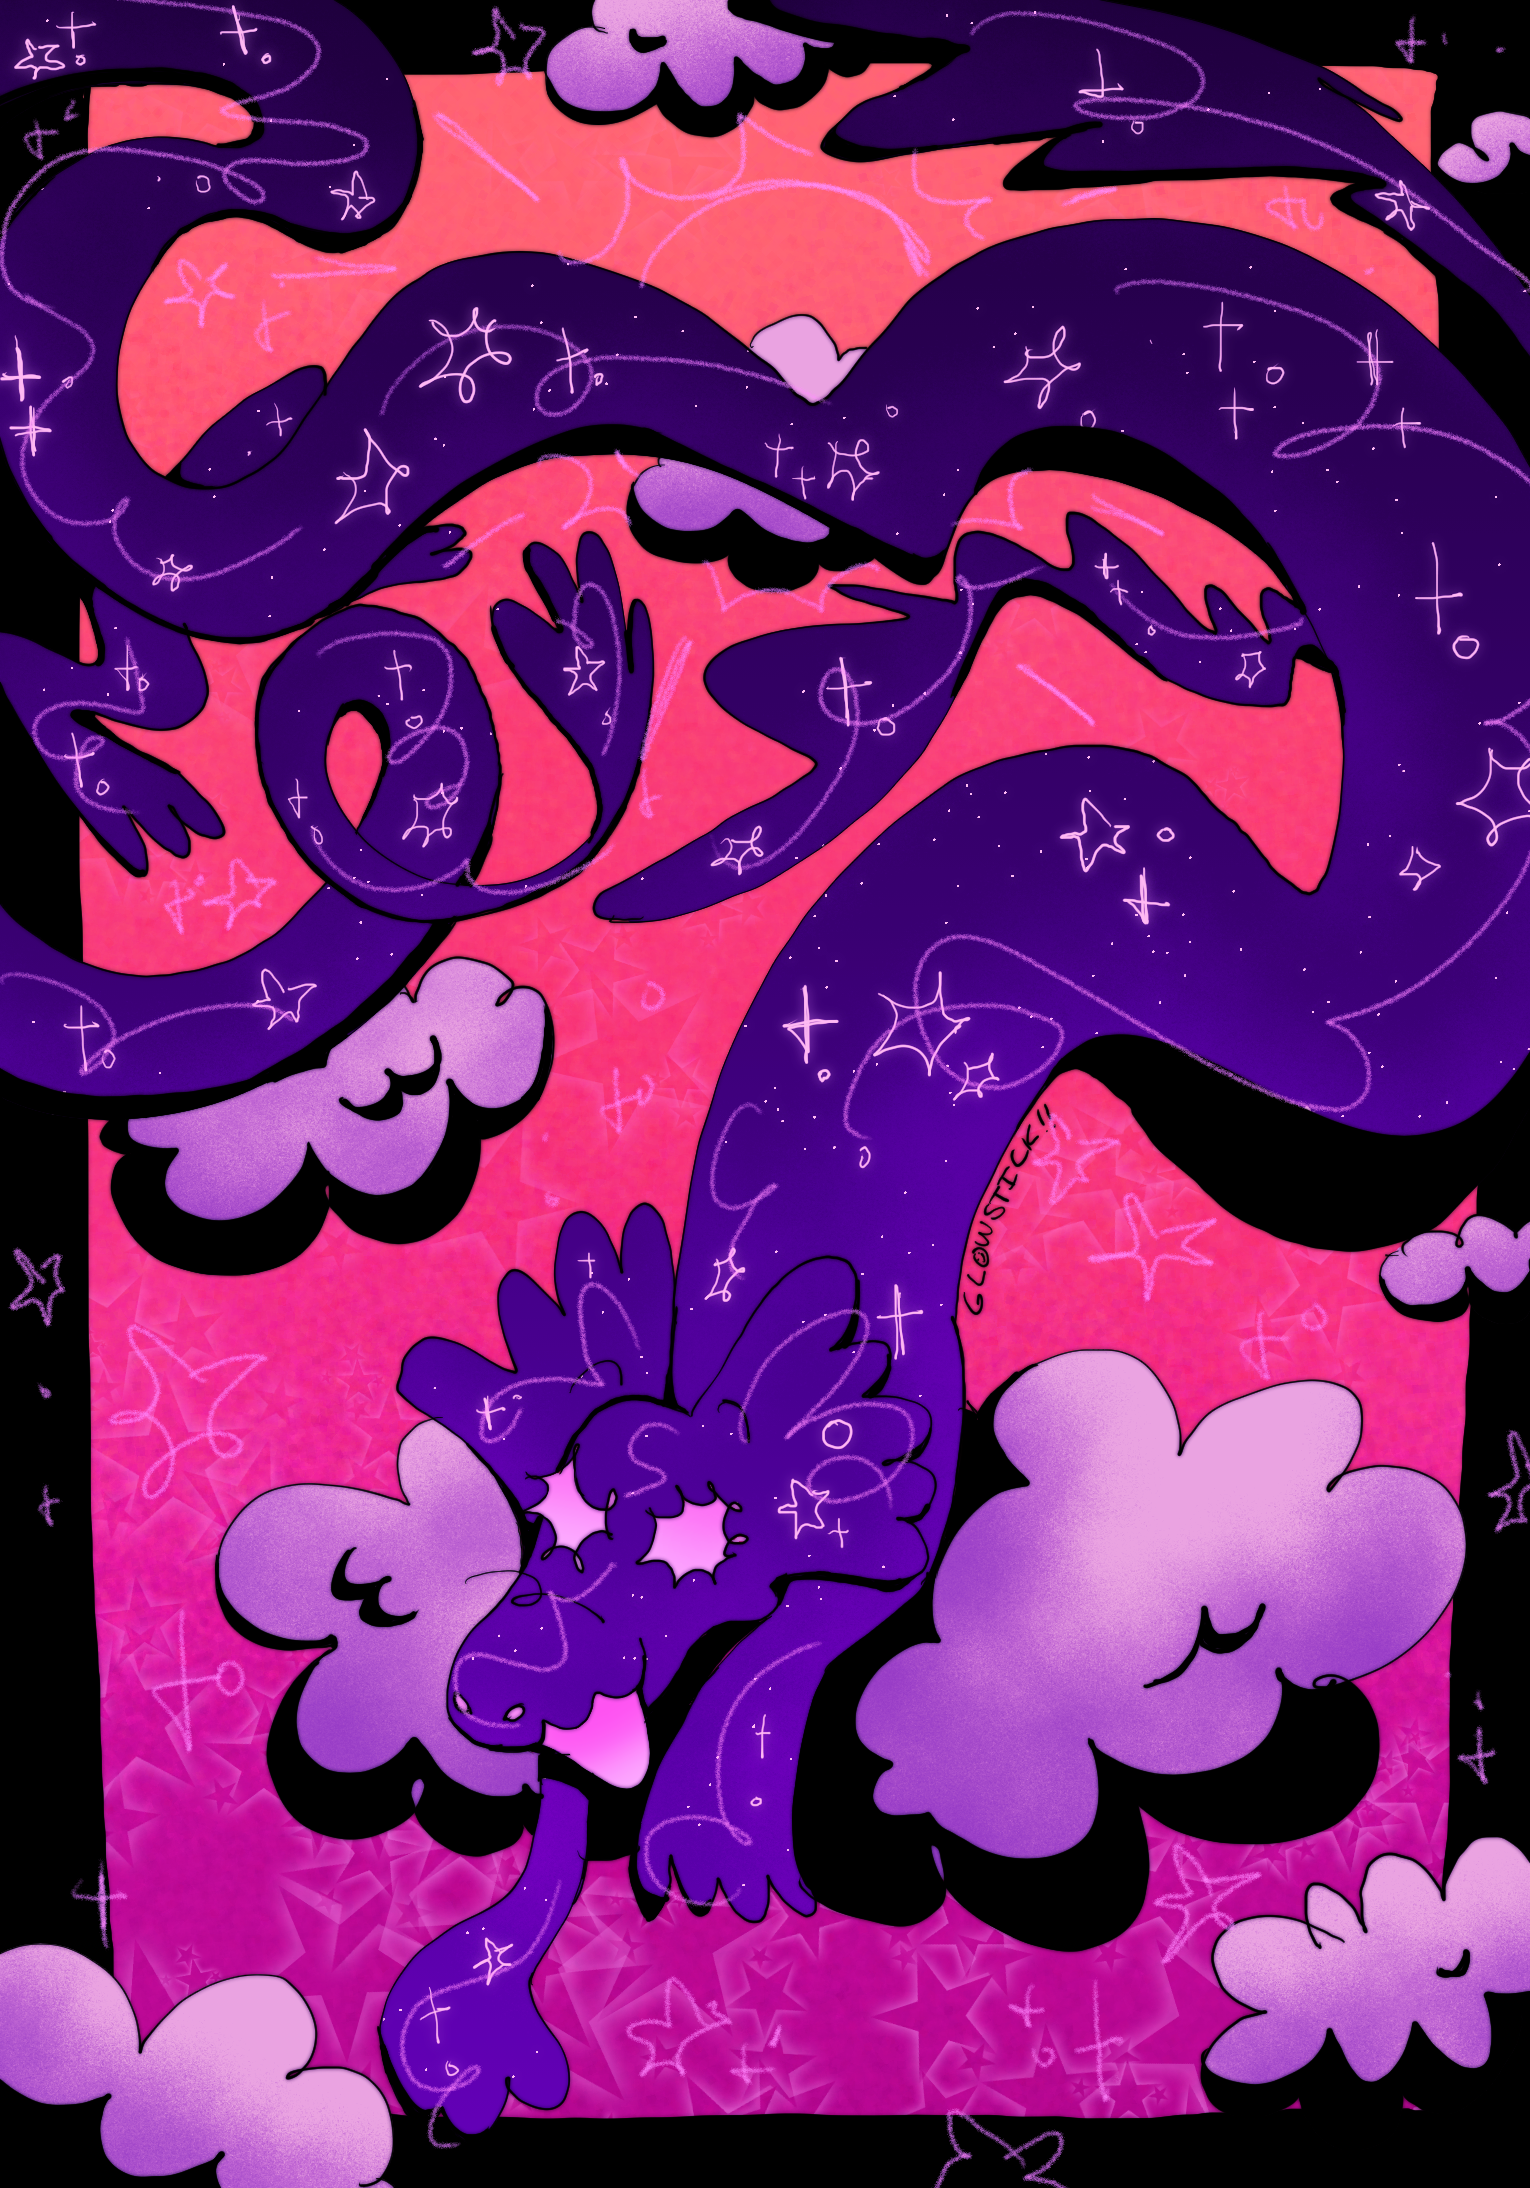  A digital drawing of a long, snake-like dragon character laying on some clouds at sunset. It has a galaxy-esque pattern covering it’s entire body.